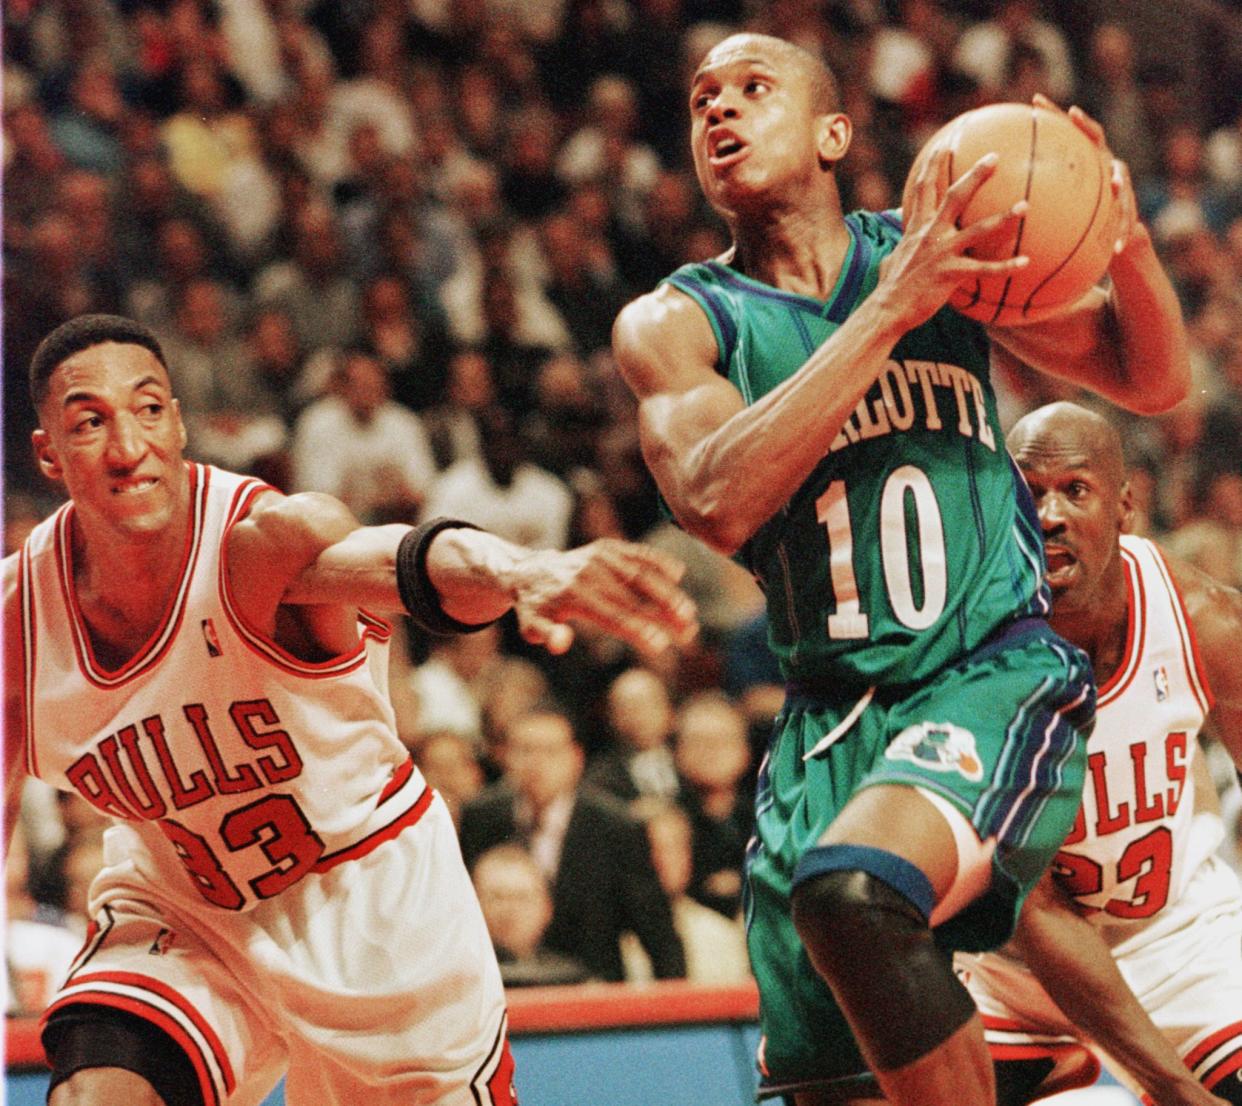 <p>File: Scottie Pippen (L) and Michael Jordan(R) of the Chicago Bulls playing in an NBA Eastern Conference semifinals game at the United Center in Chicago in 1994</p> (JEFF HAYNES/AFP via Getty Images)